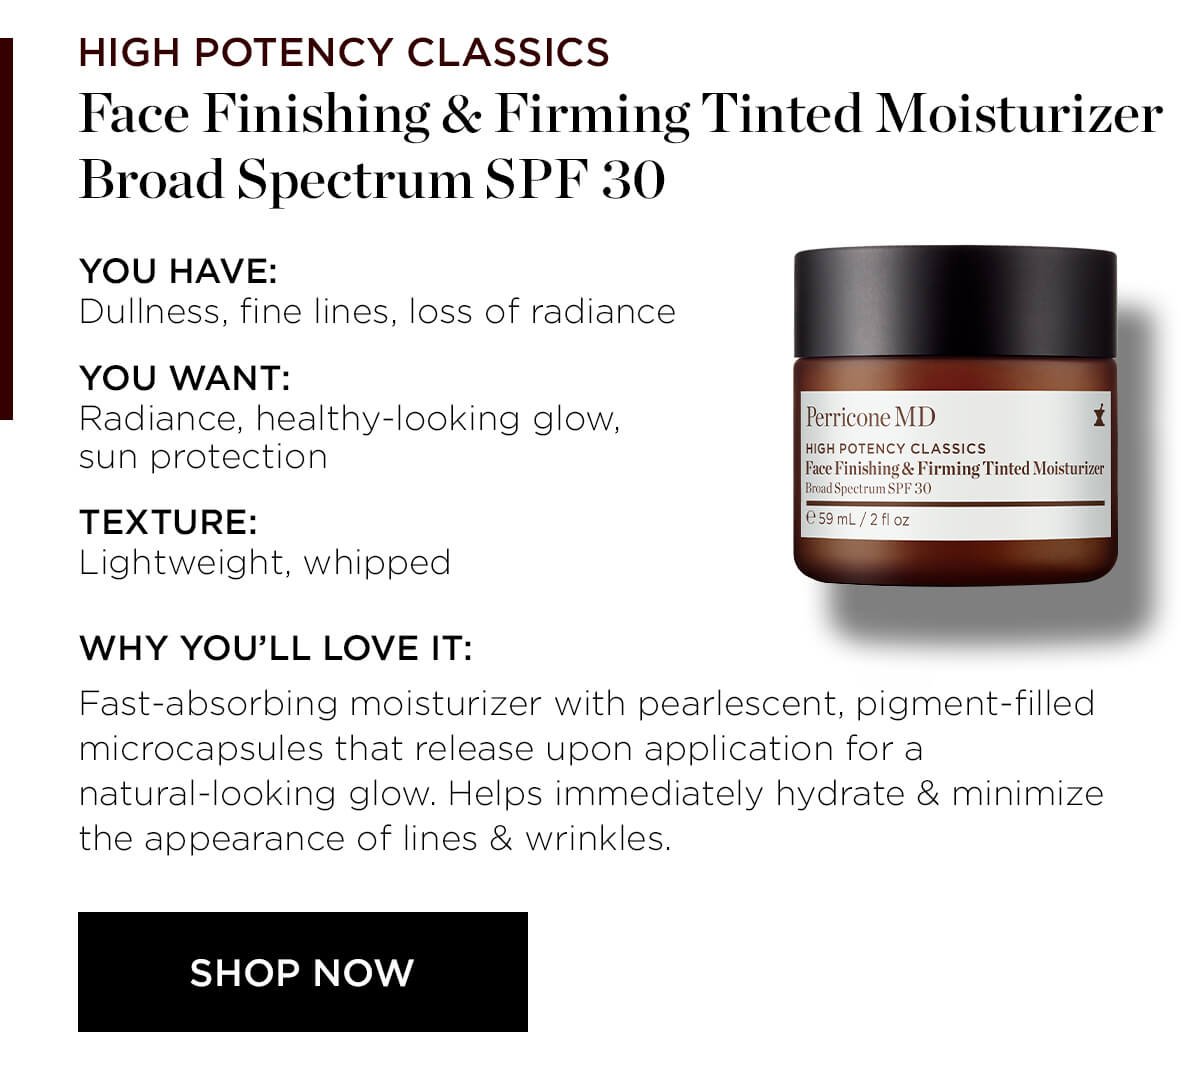 HIGH POTENCY CLASSICS FACE FINISHING AND FIRMING TINTED MOISTURIZER